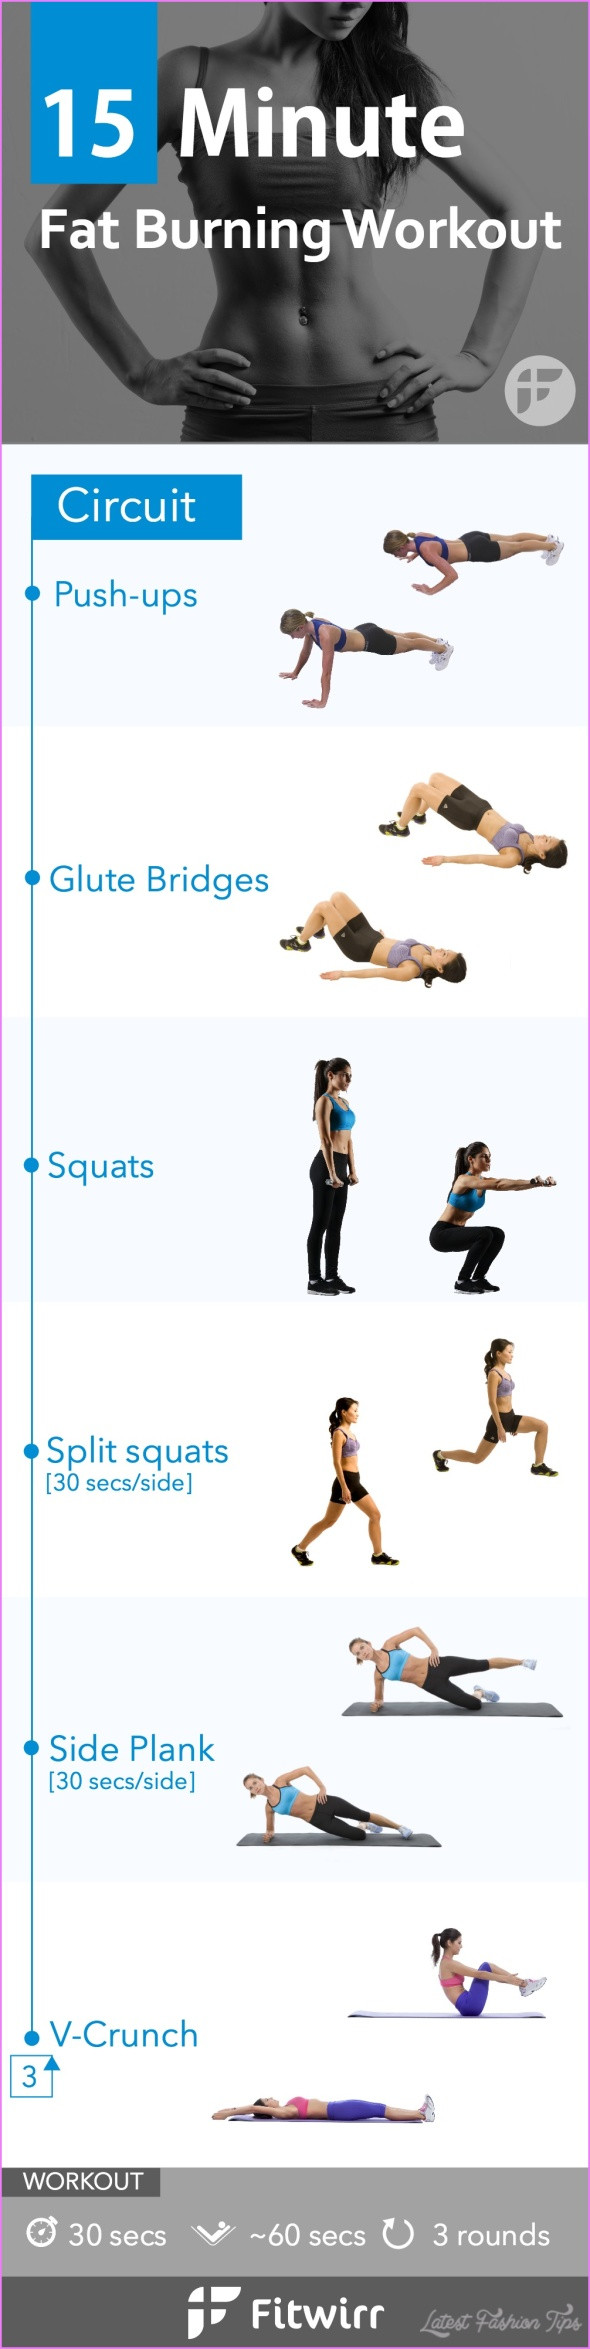 Weight Loss Exercises For Obese Women
 Best Weight Loss Exercises For Women LatestFashionTips